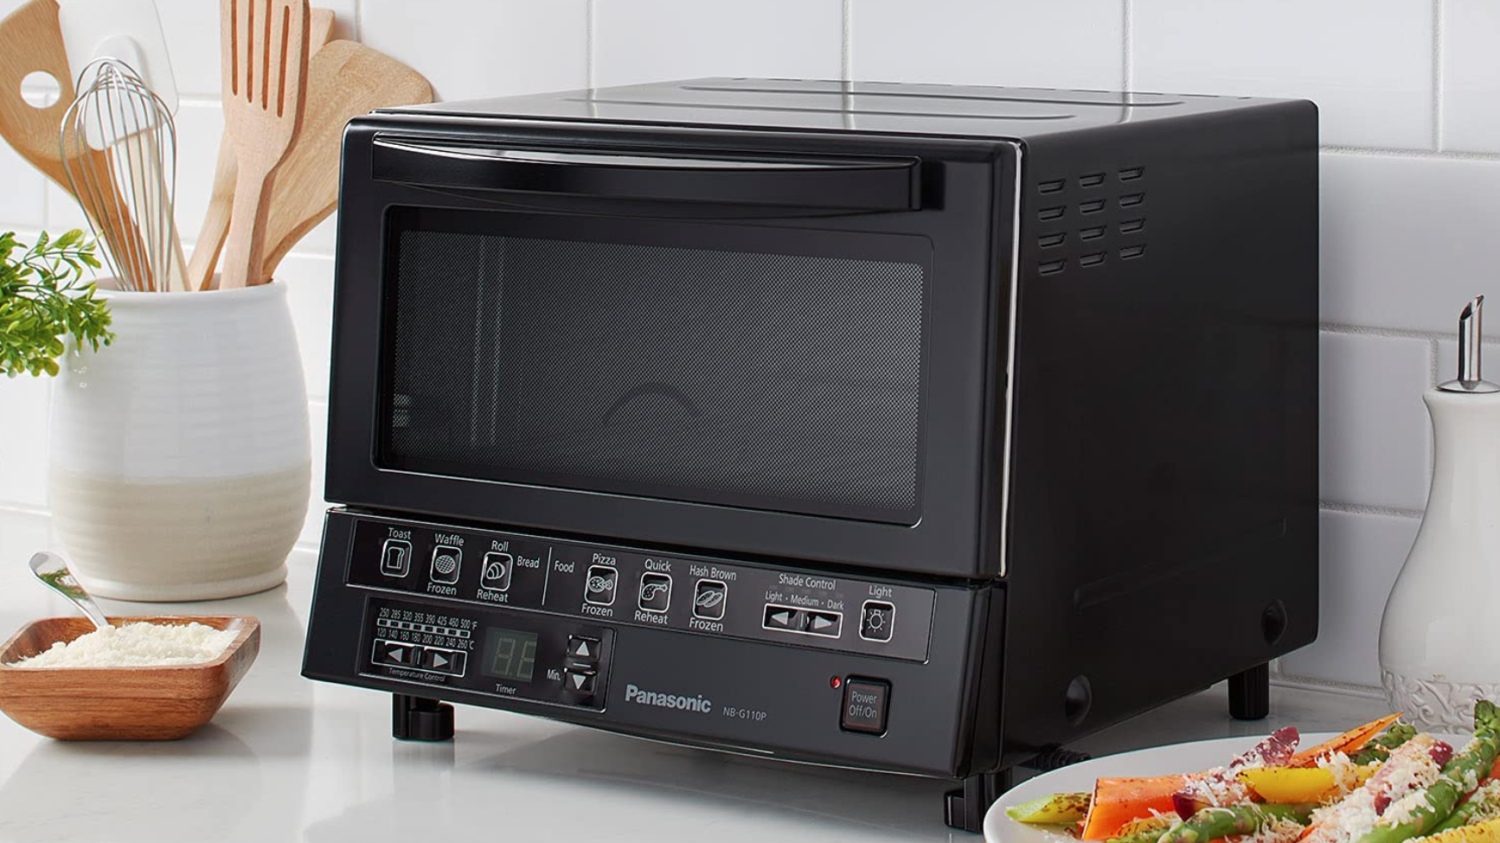 This versatile little toaster oven can cover all of your baking needs